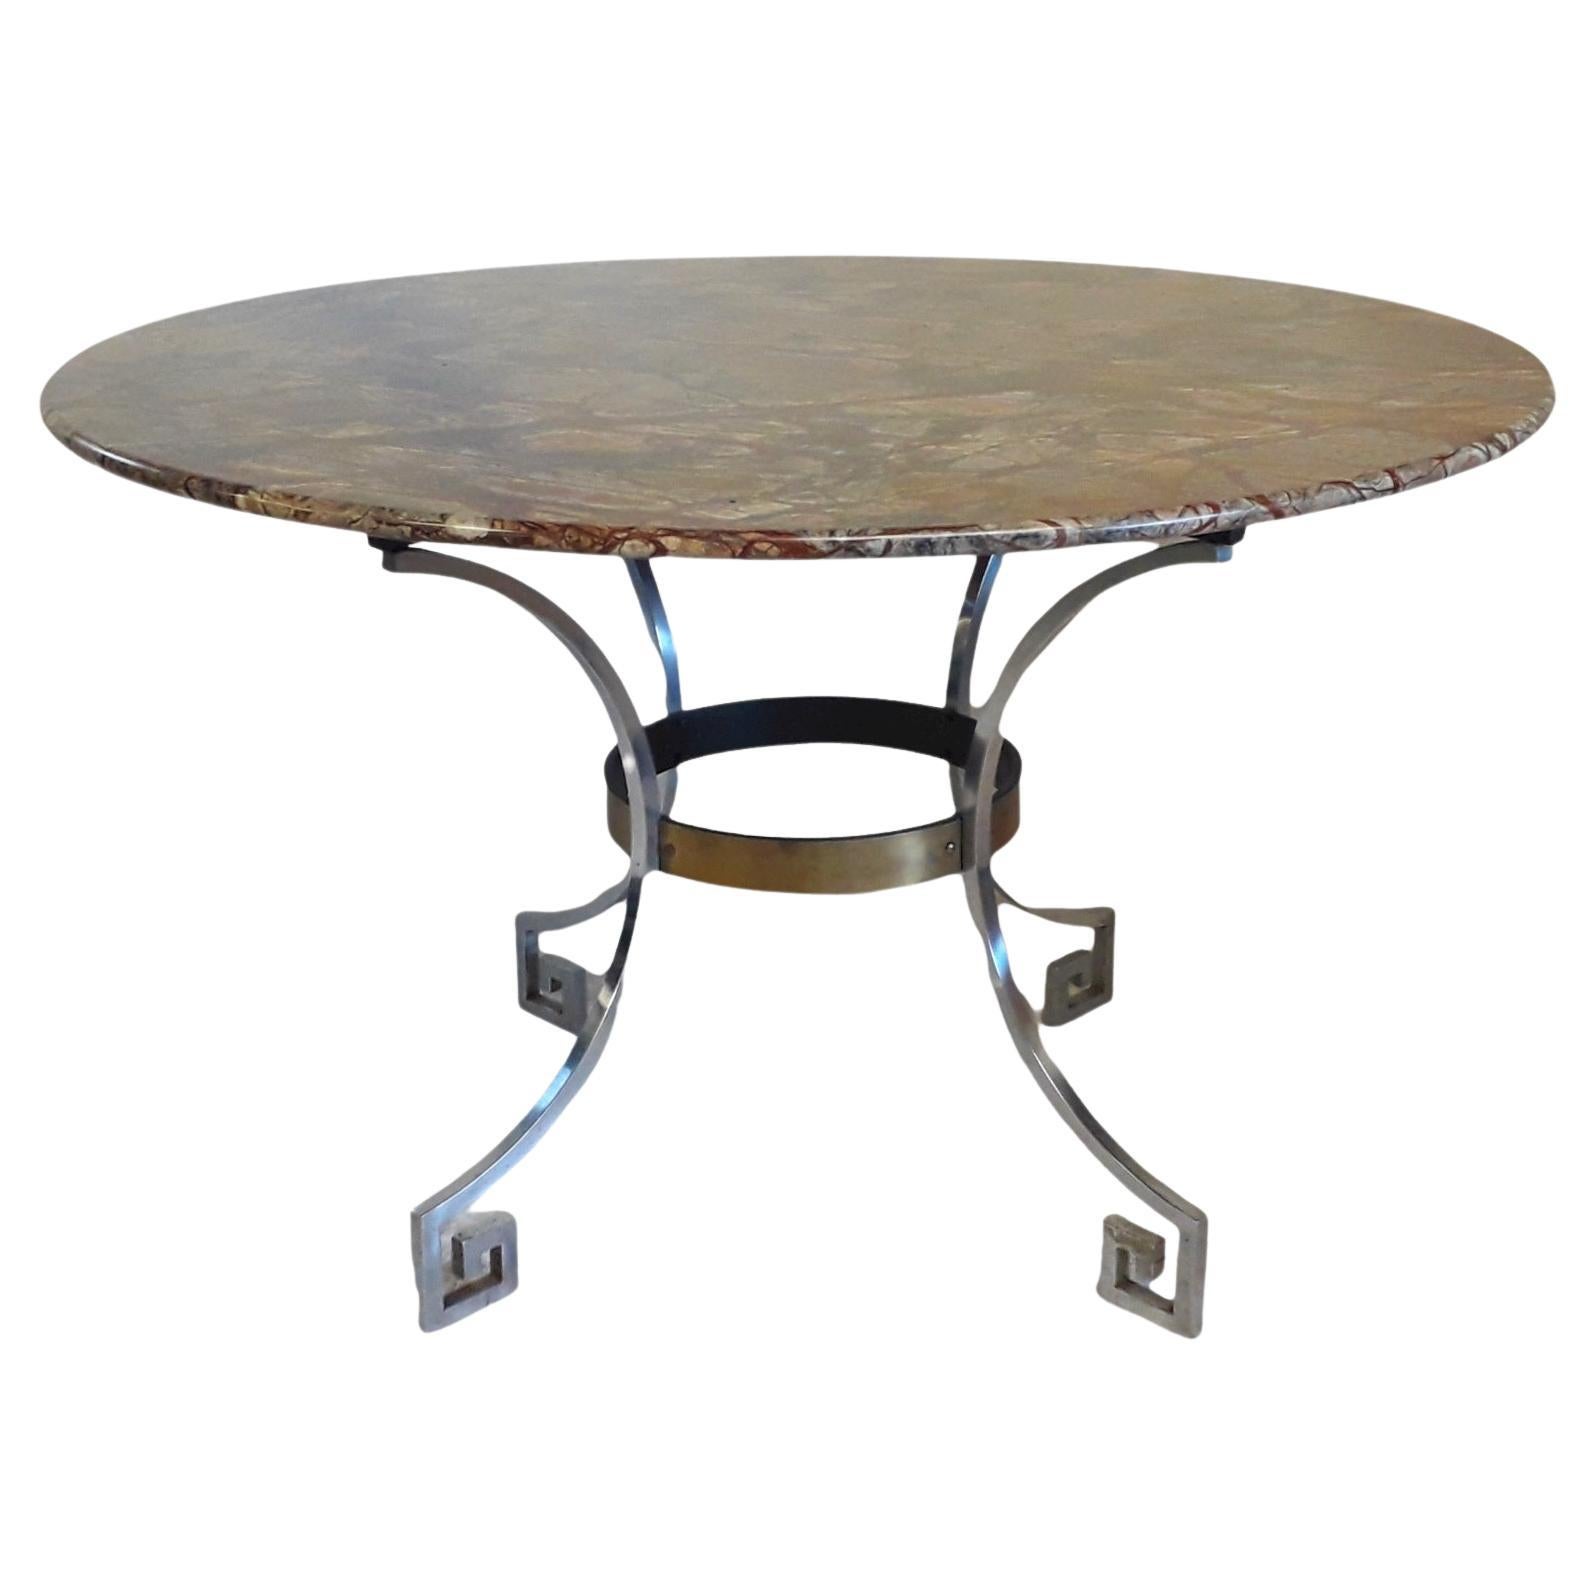 Marble Center Circular Dining Table